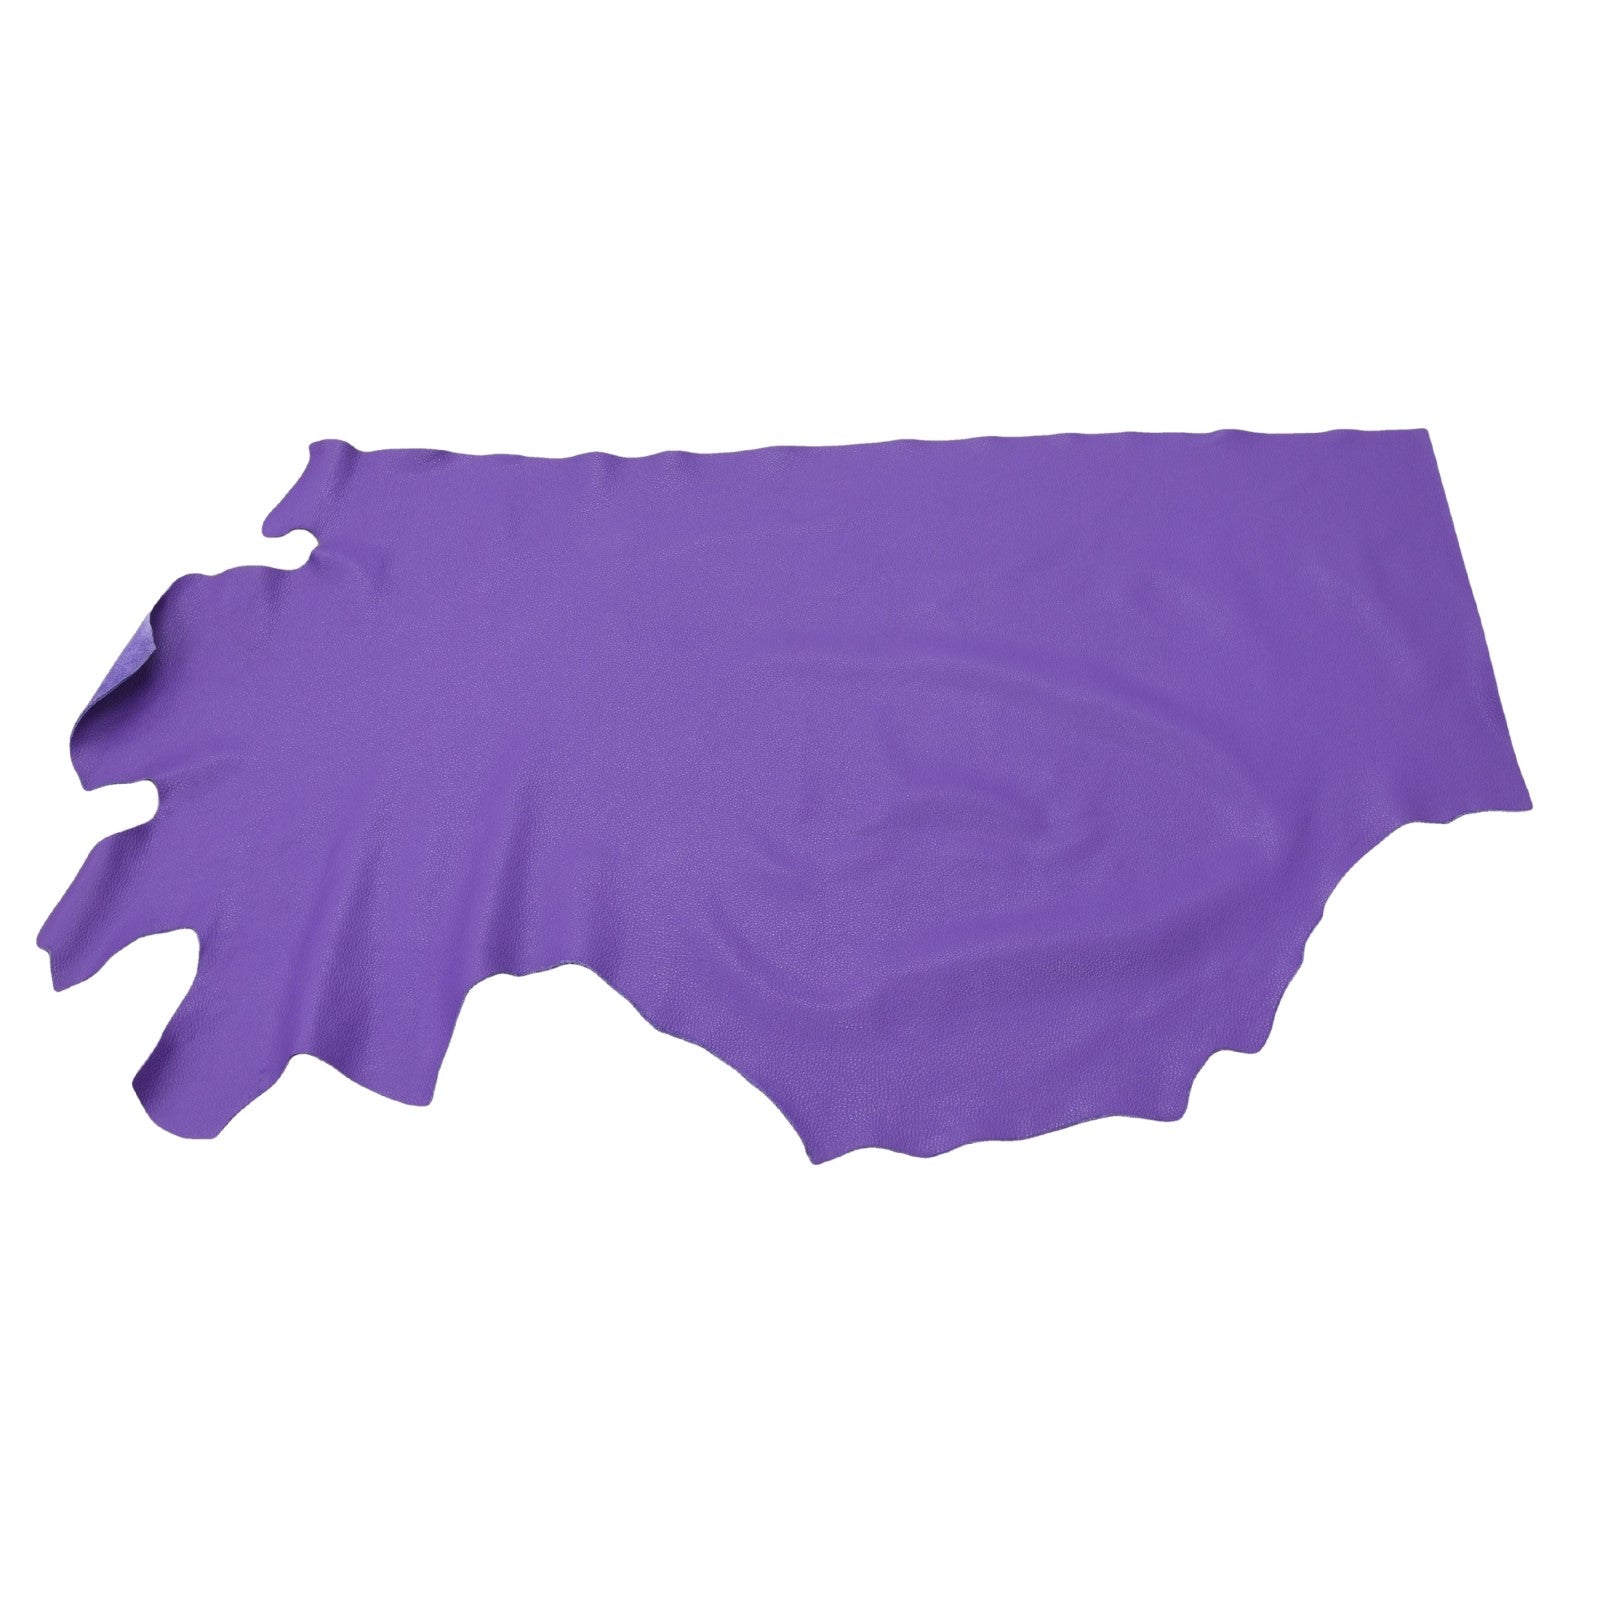 Viking Skol Purple Tried n True 3-4 oz Leather Cow Hides, 6.5-7.5 Sq Ft / Project Piece (Bottom) | The Leather Guy